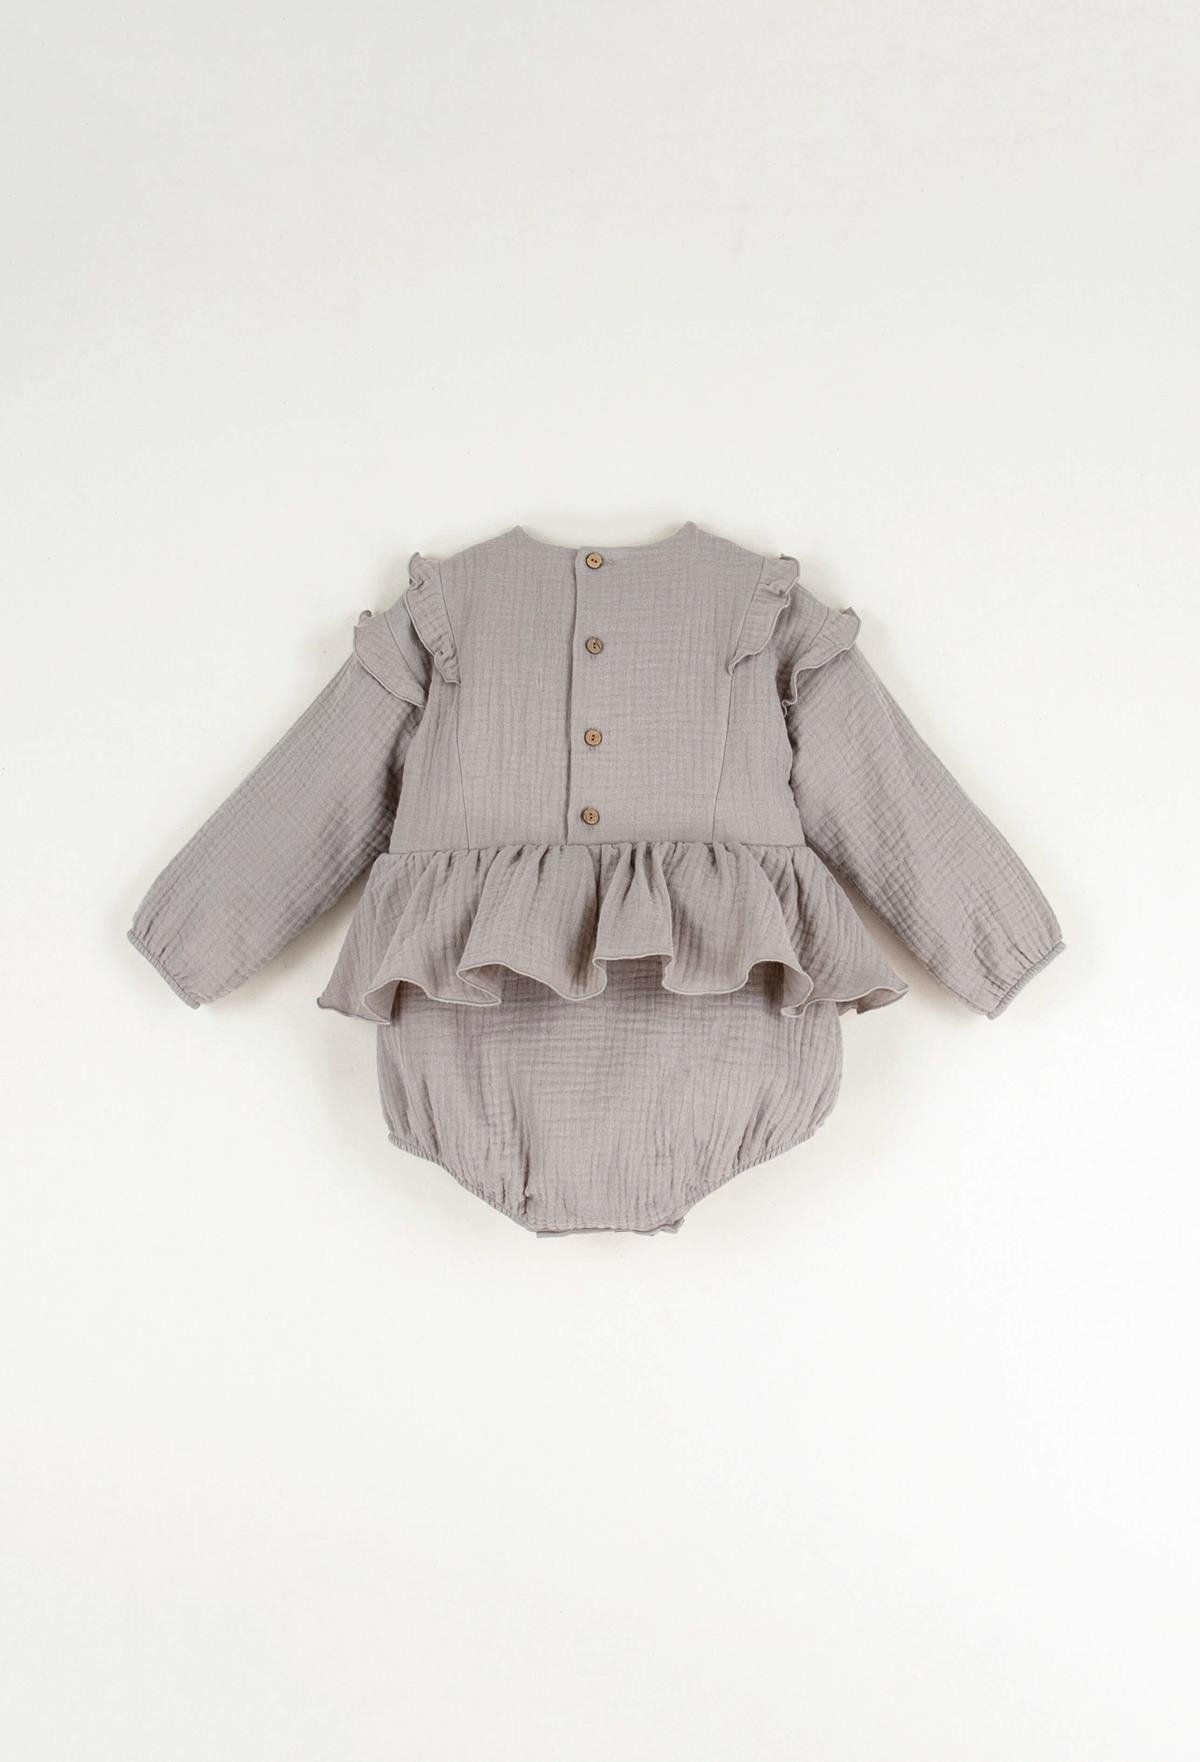 Mod.3.1 Taupe organic fabric embroidered romper suit with pintucks | AW22.23 Mod.3.1 Taupe organic fabric embroidered romper suit with pintucks